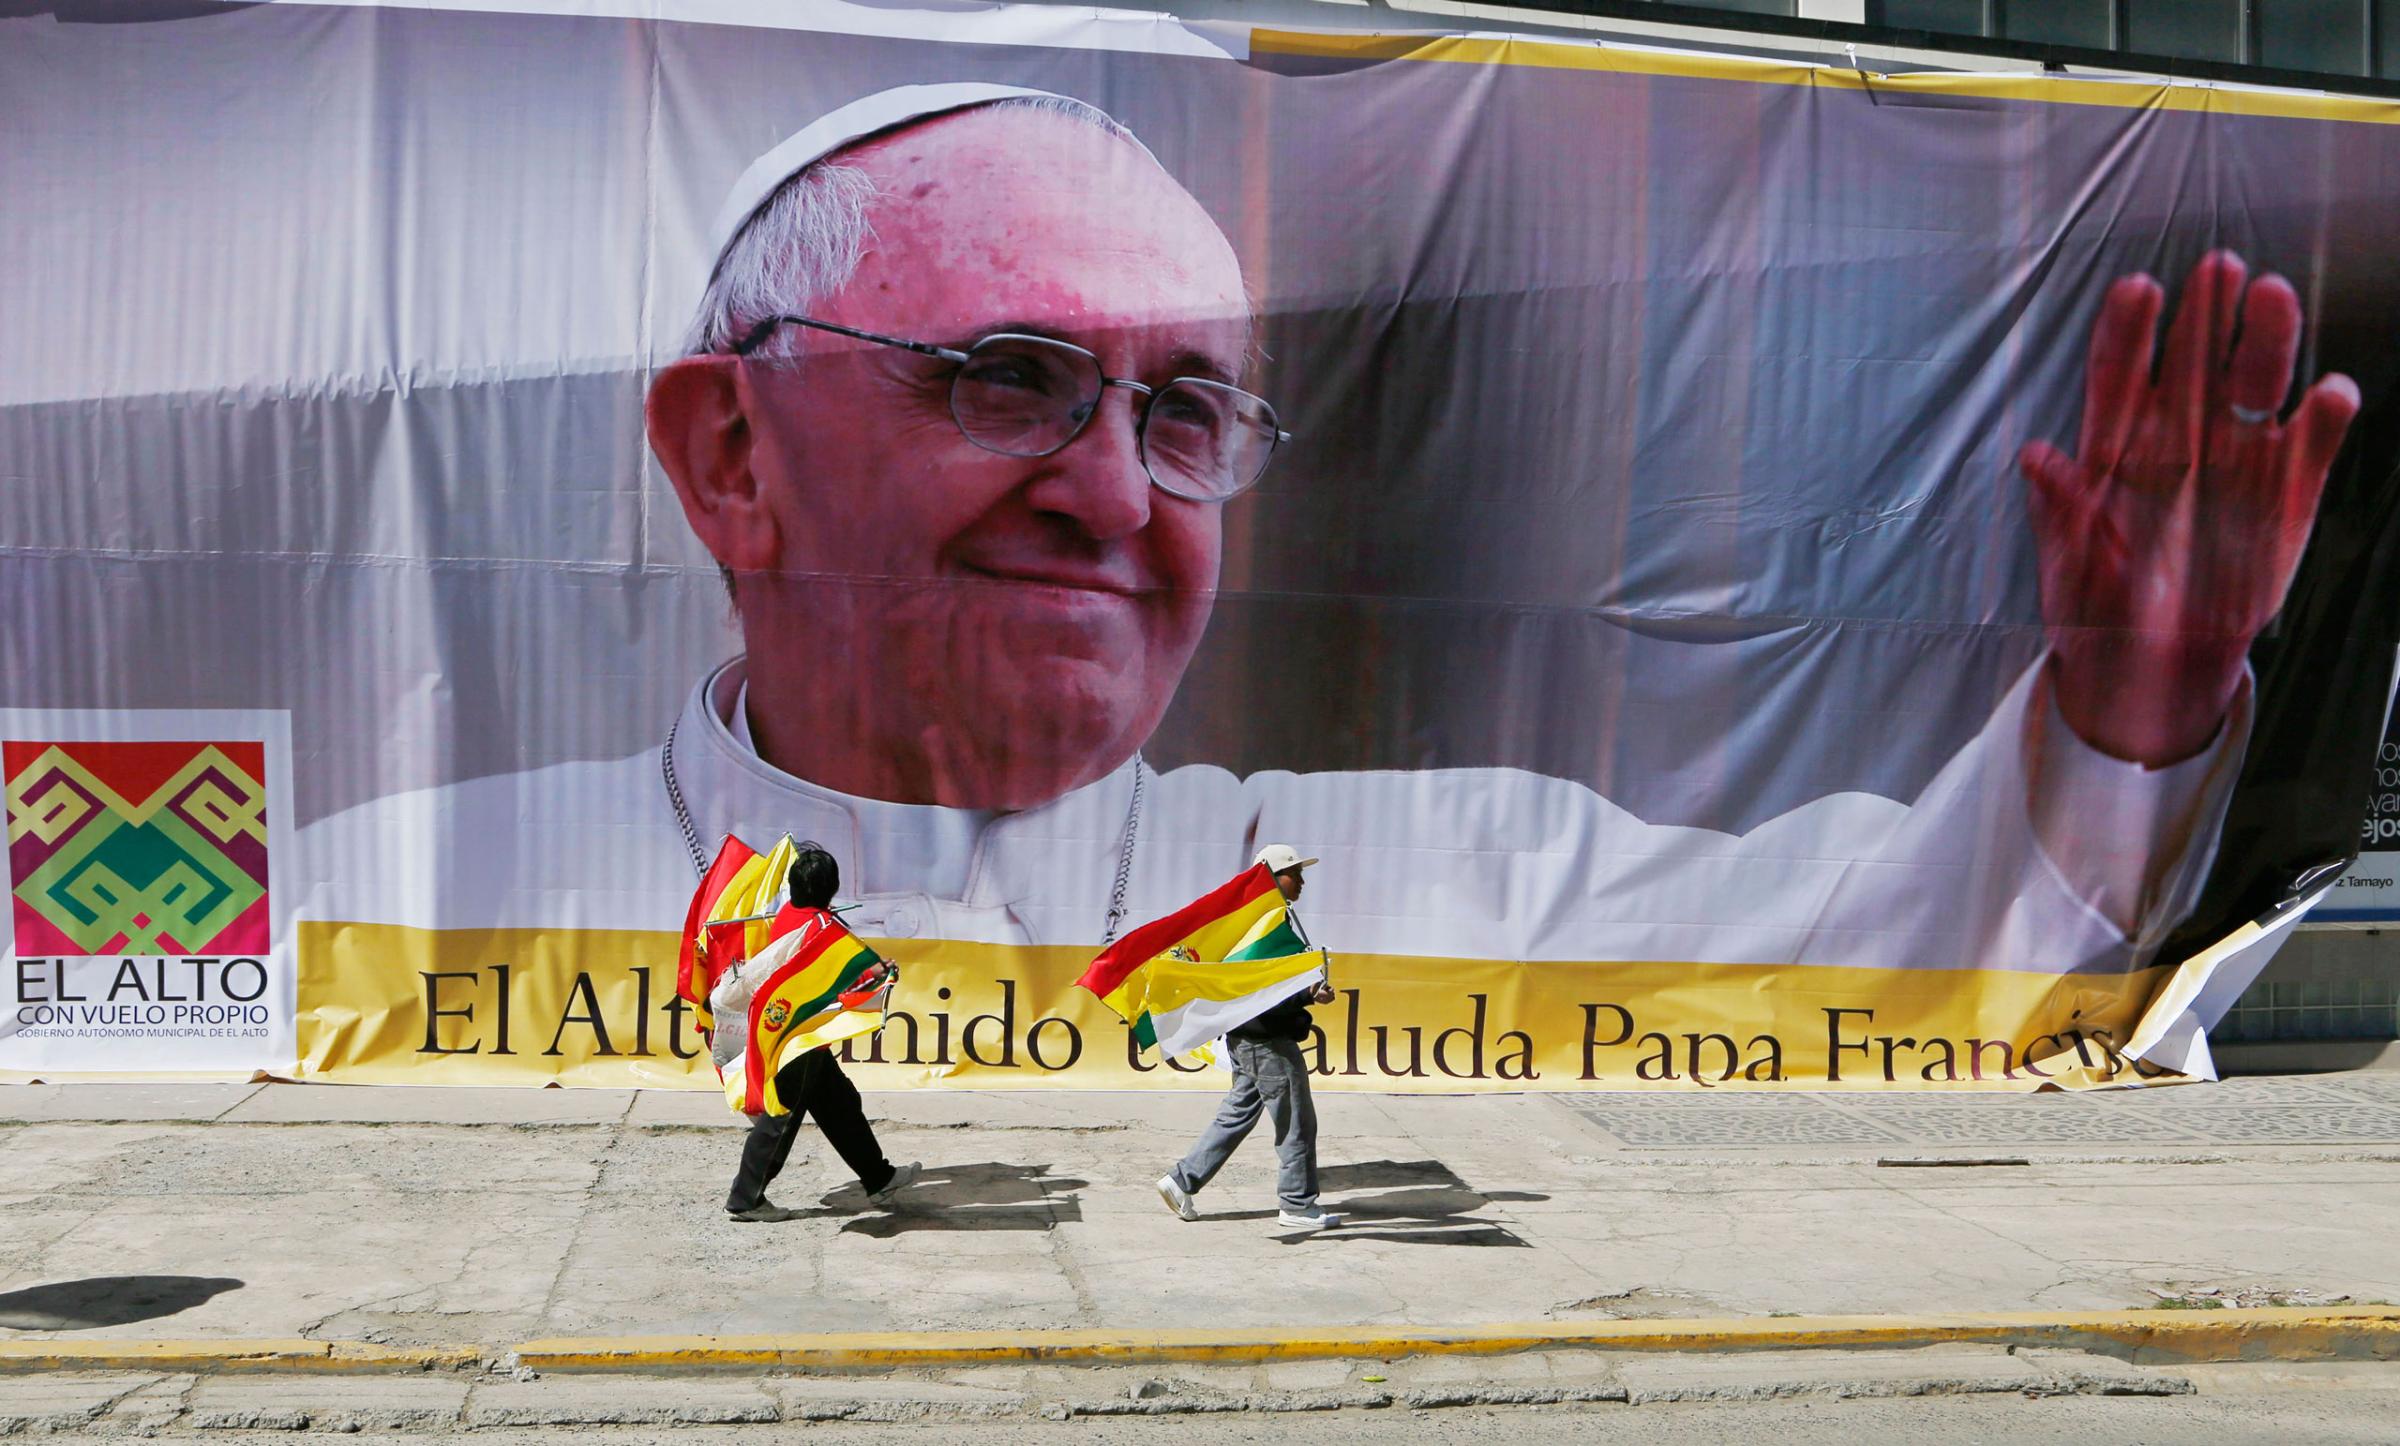 Street vendors selling Bolivian and Vatican flags pass a large image of Pope Francis ahead of the pope's arrival to El Alto, Bolivia, Wednesday, July 8, 2015. Due to the altitude, the pontiff will spend only a few hours in the capital city La Paz, which is near El Alto, during his South American tour. (AP Photo/Juan Karita)